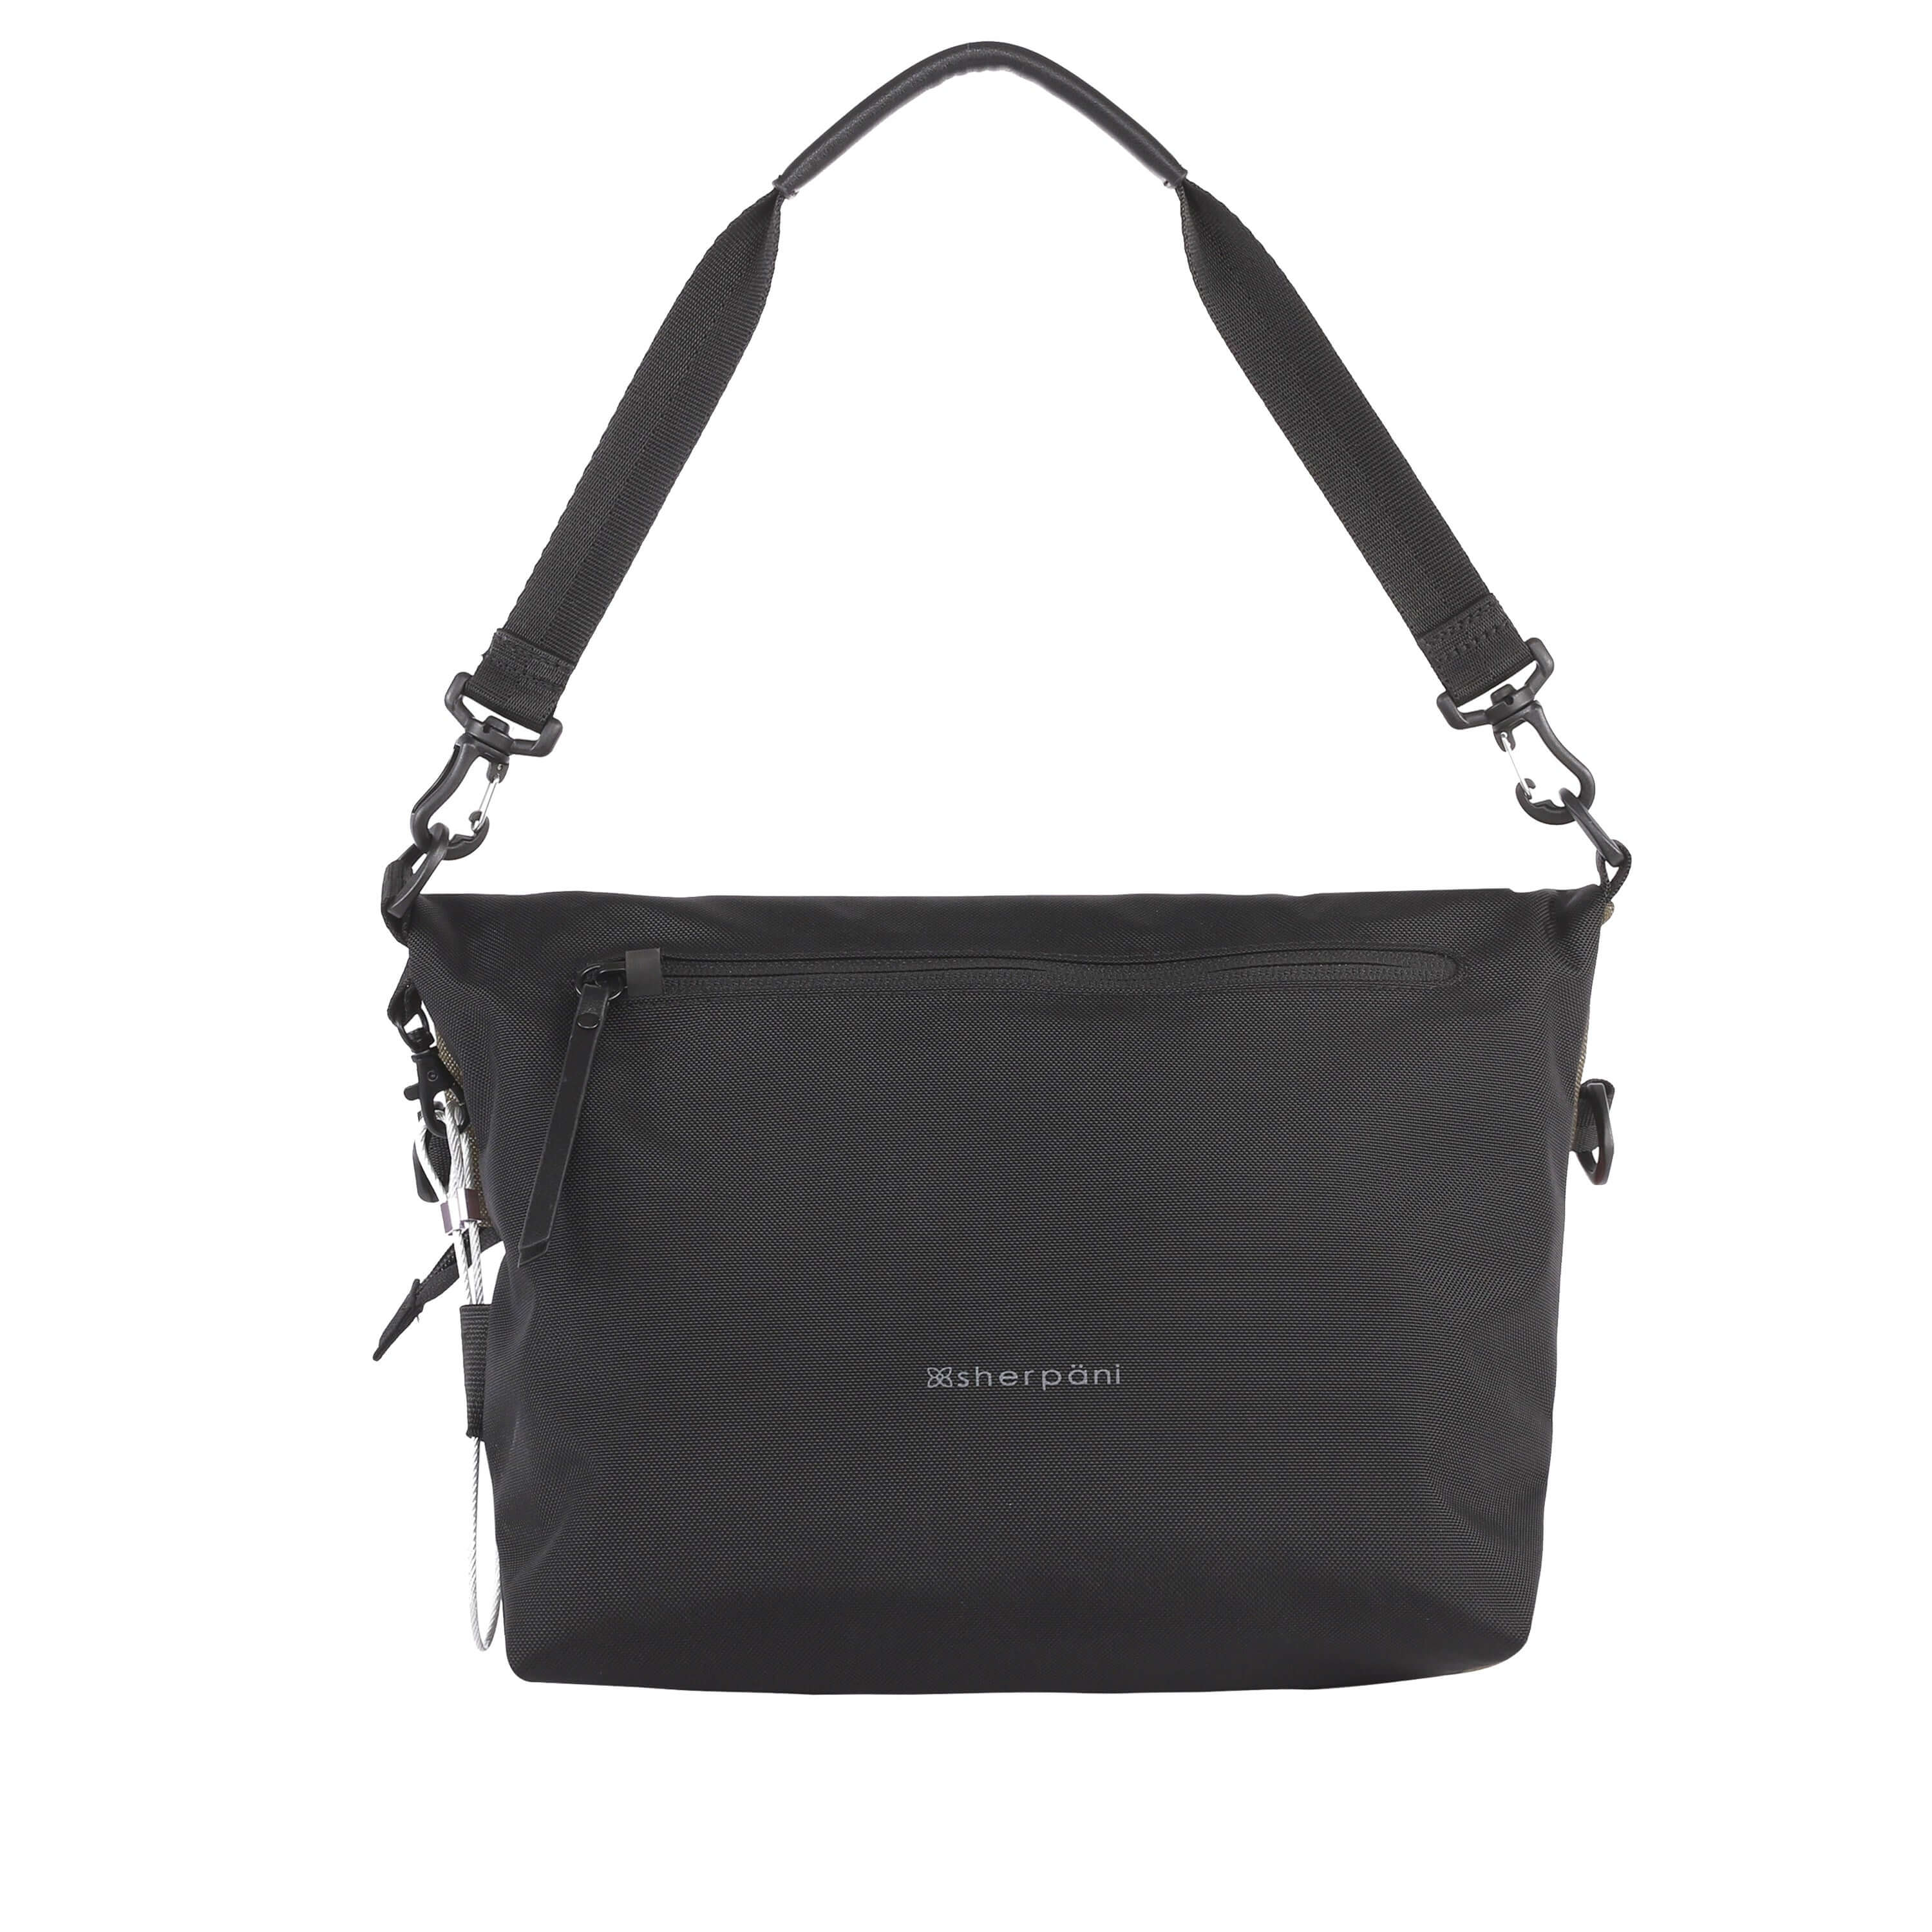 Flat view of the back of Sherpani’s Anti-Theft bag, the Vale AT. The back is entirely black, and has vegan leather accents in black. There is an external pocket with a locking zipper, a chair loop lock on one side, and a detachable short tote handle clipped onto the bag.